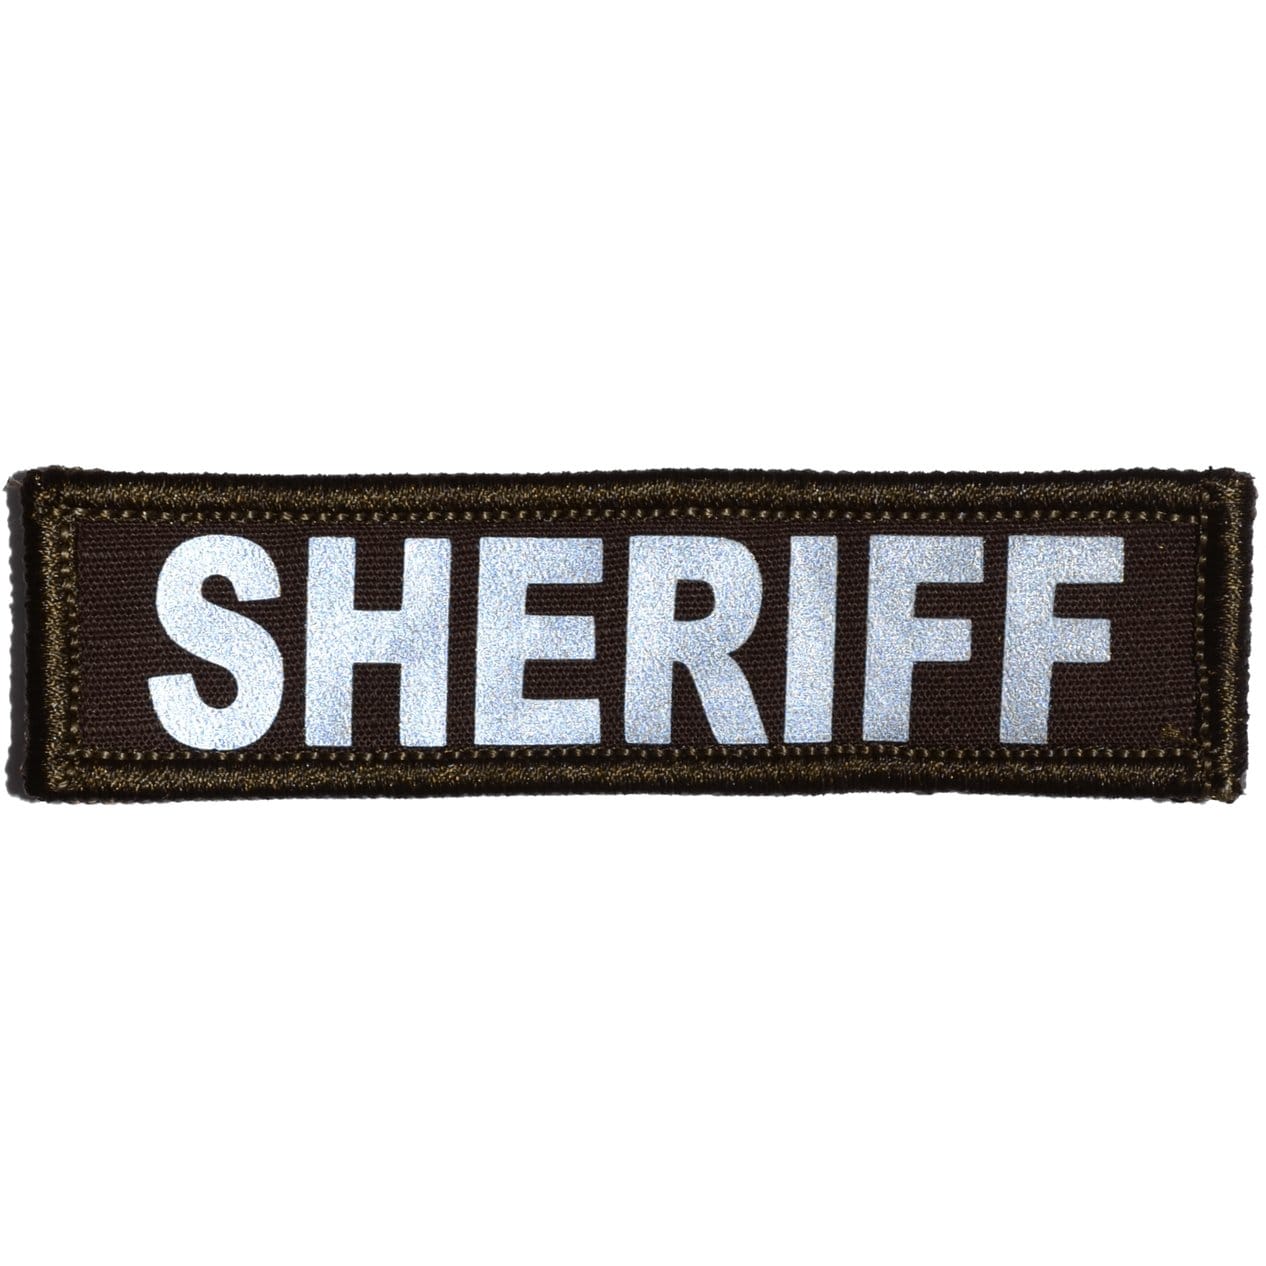 Tactical Gear Junkie Patches Sheriff's Brown Sheriff Reflective - 1x3.75 Patch